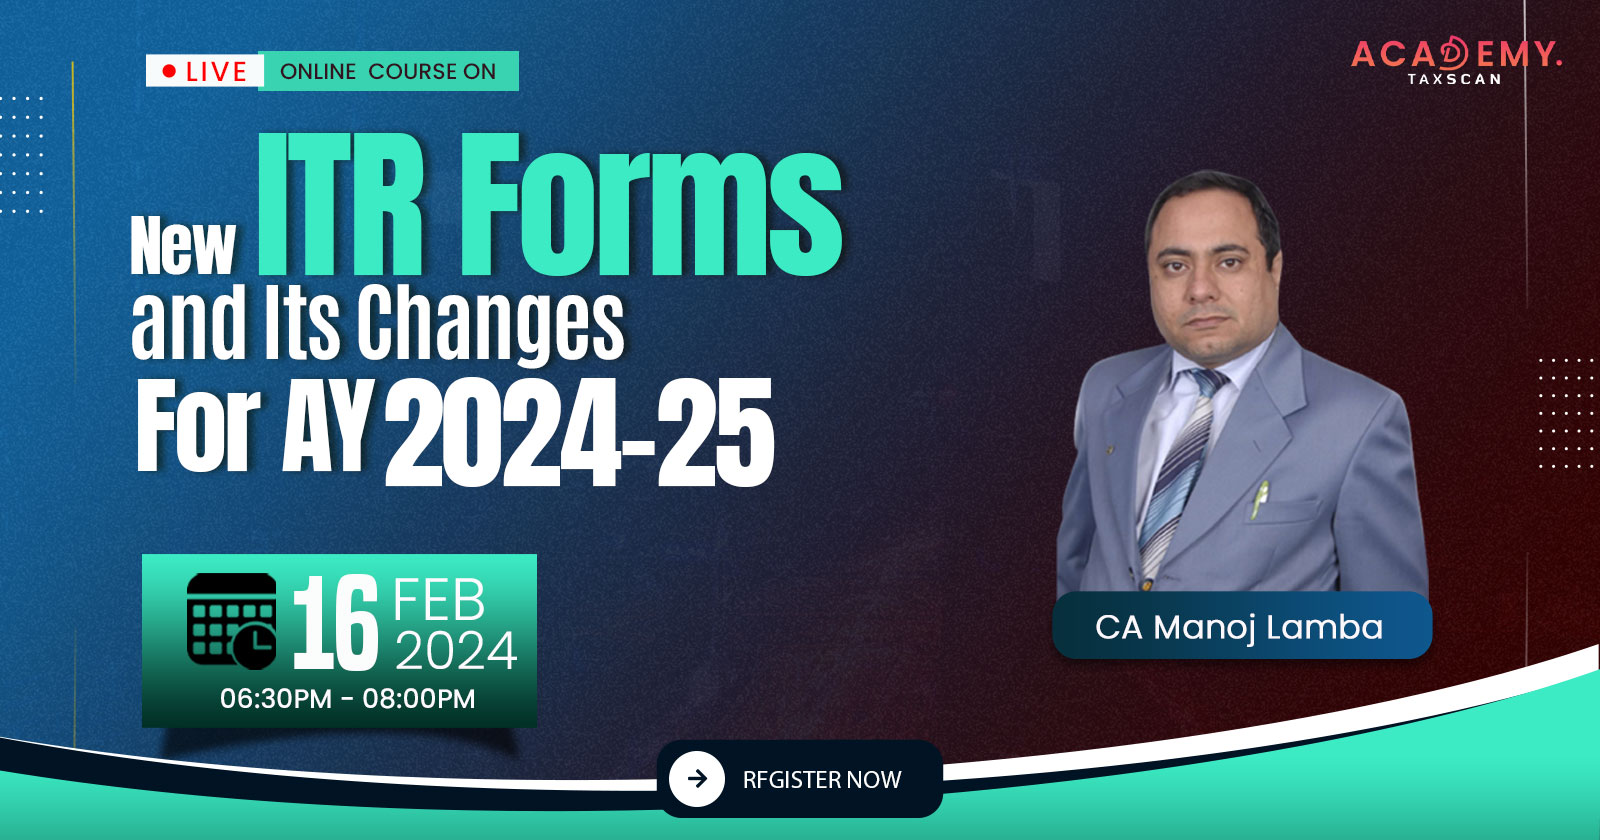 Live Webinar - New ITR Forms - ITR Forms - ITR - Changes in ITR Form - Assessment Year 2024-25 - Insights on the changes made in ITR forms - Taxscan Academy - Tax Academy